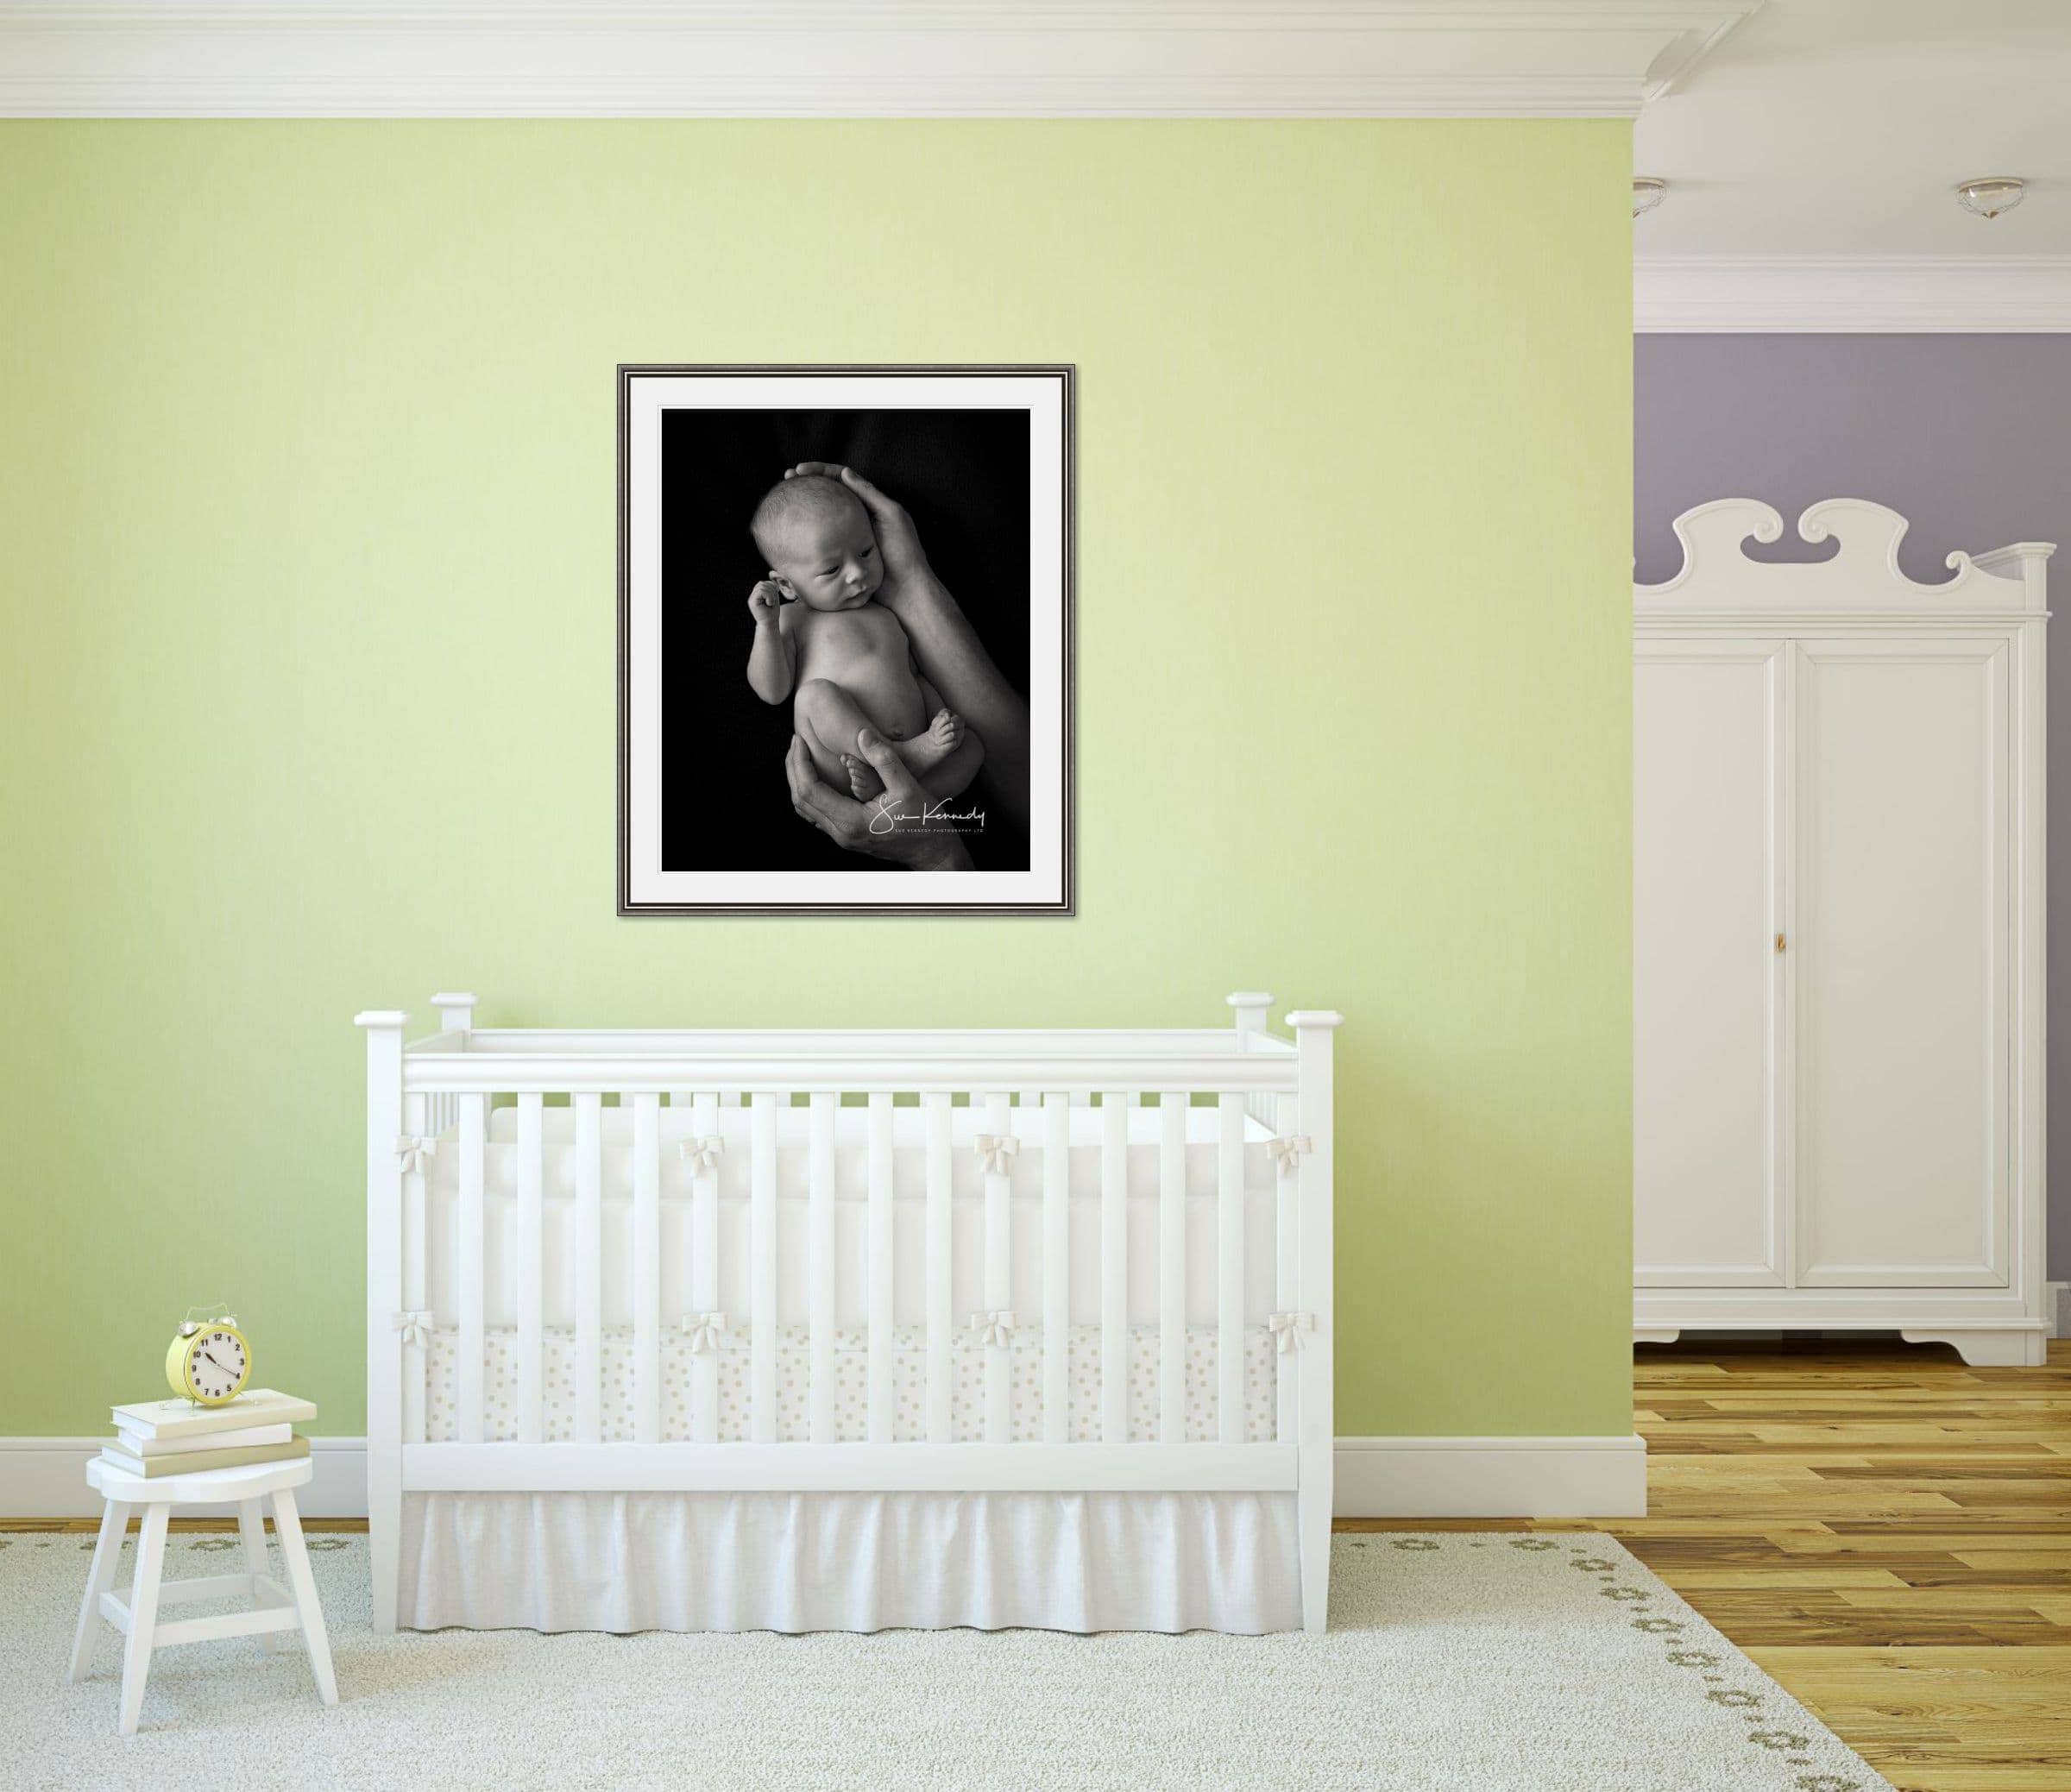 Room view of a nursery with a framed baby portrait on the wall above the baby's cot